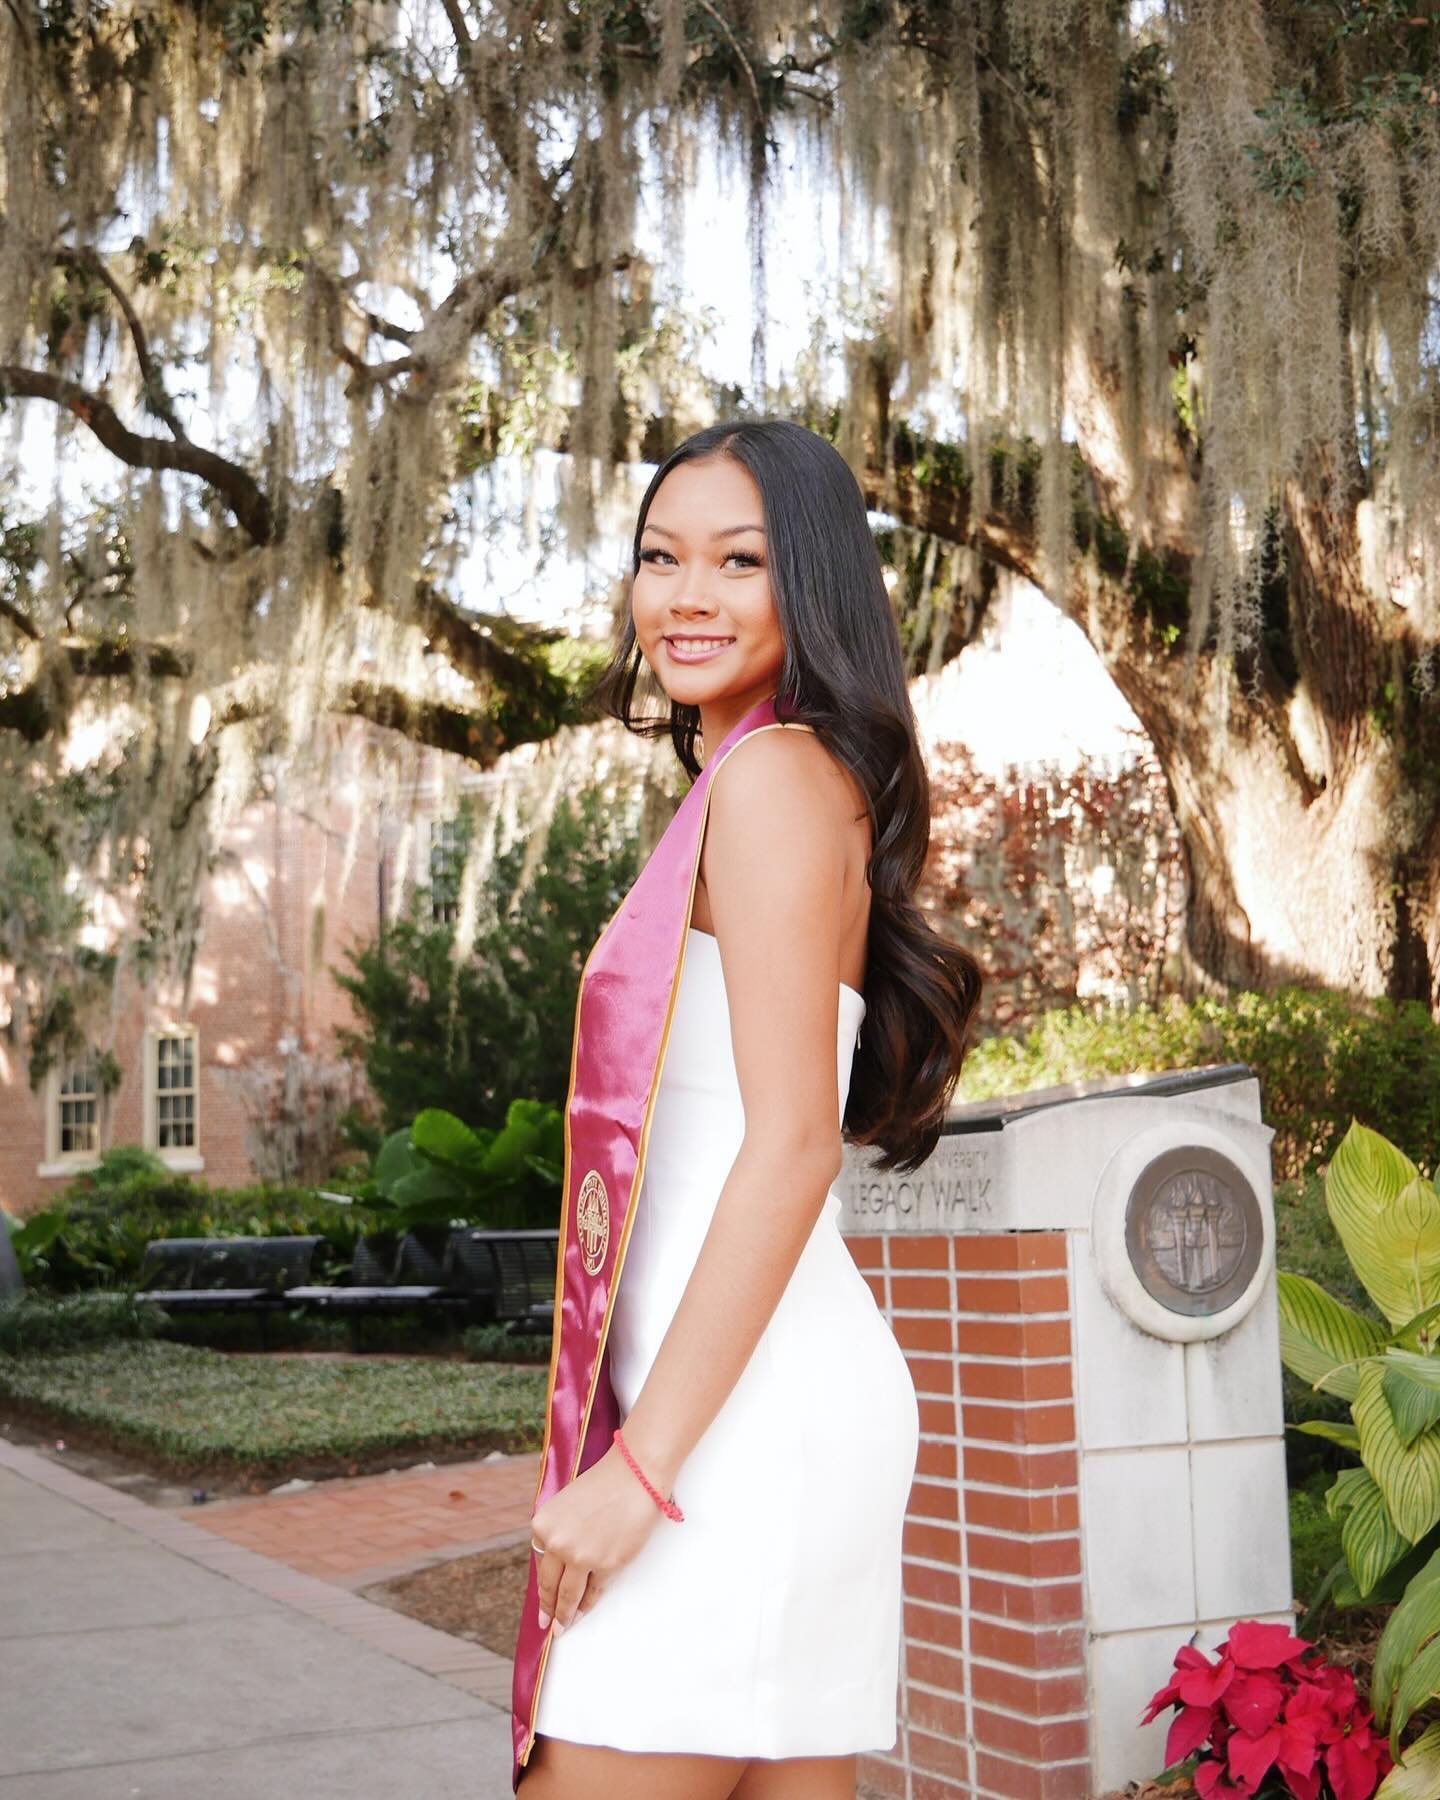 Had the privilege of capturing these sweet moments for the sweetest girl!✨🎓

Congratulations Celina!

Dm me for Spring graduation shoot inquiries! 
#fsu #fsugraduation #classof2023 #classof2024 #photography #gradshoot #wpbphotography #tallahasseepho